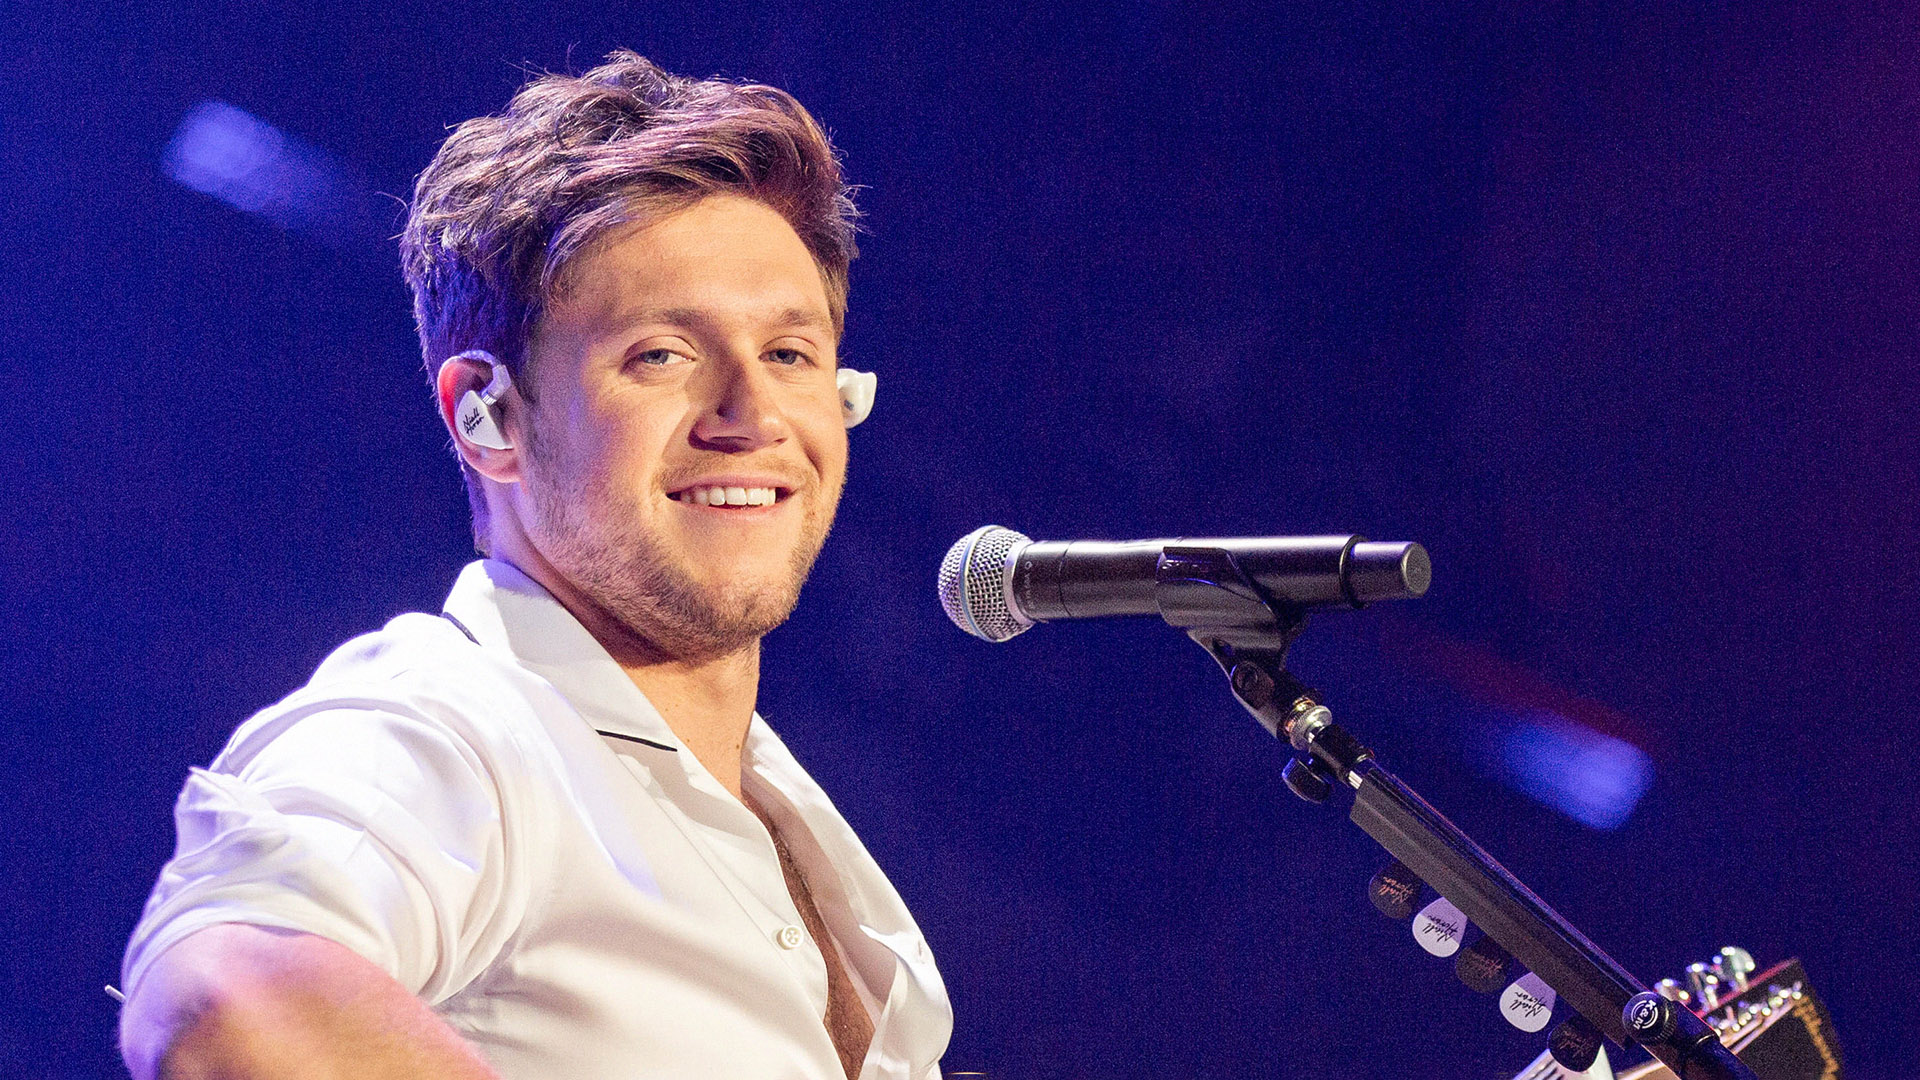 A One Direction Biopic? You Won't Guess Who Niall Horan Would Want to Star in It